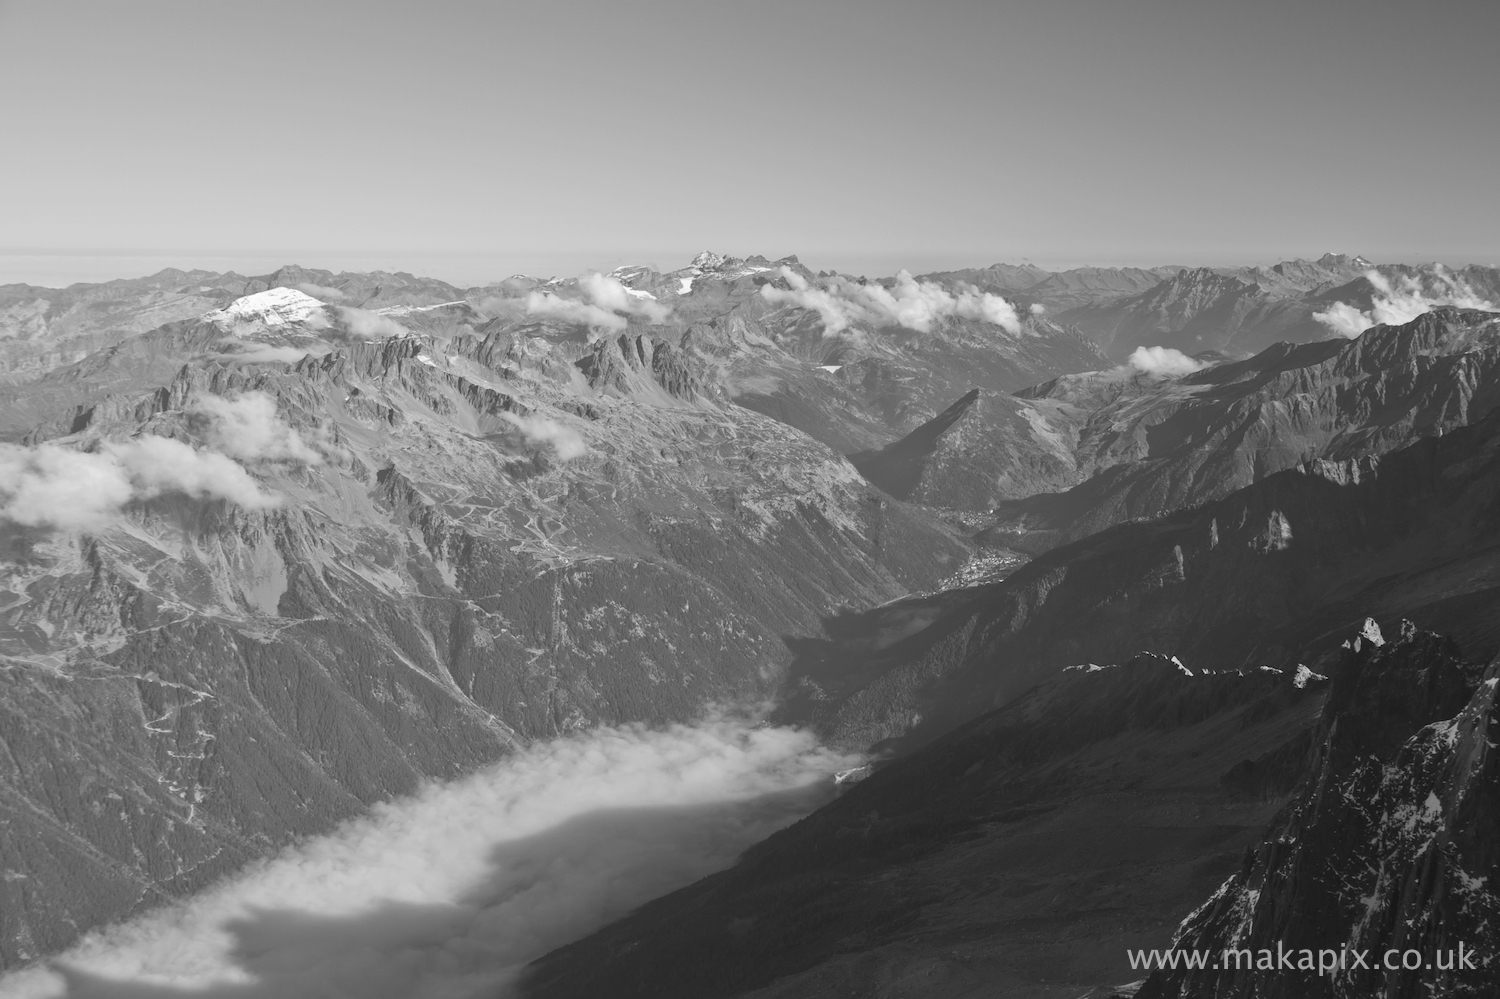 The Alps in b&w